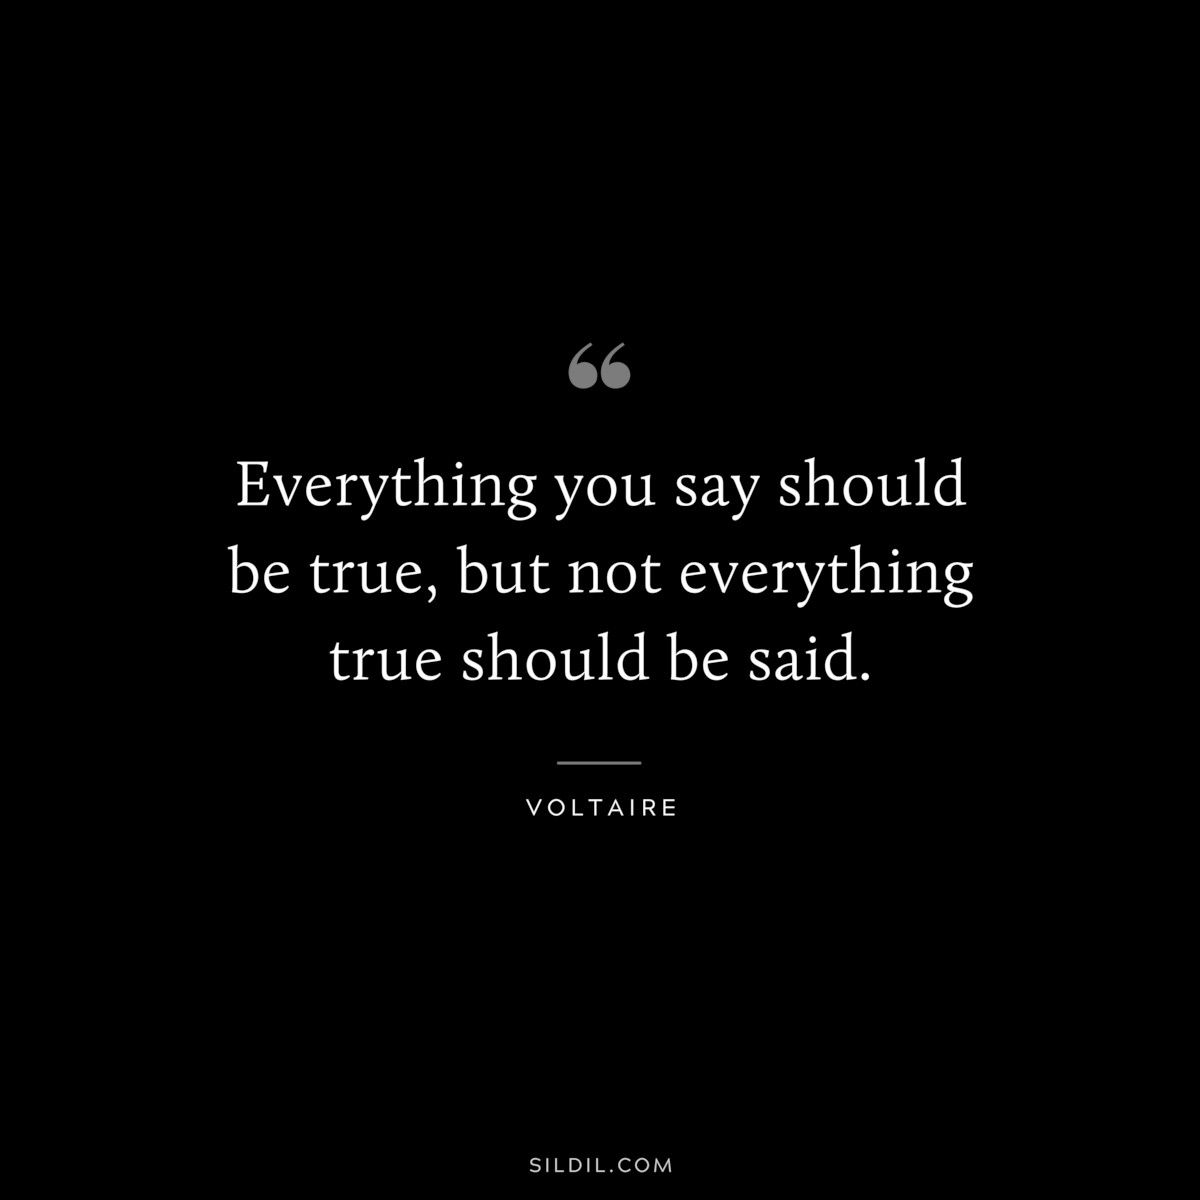 Everything you say should be true, but not everything true should be said. ― Voltaire